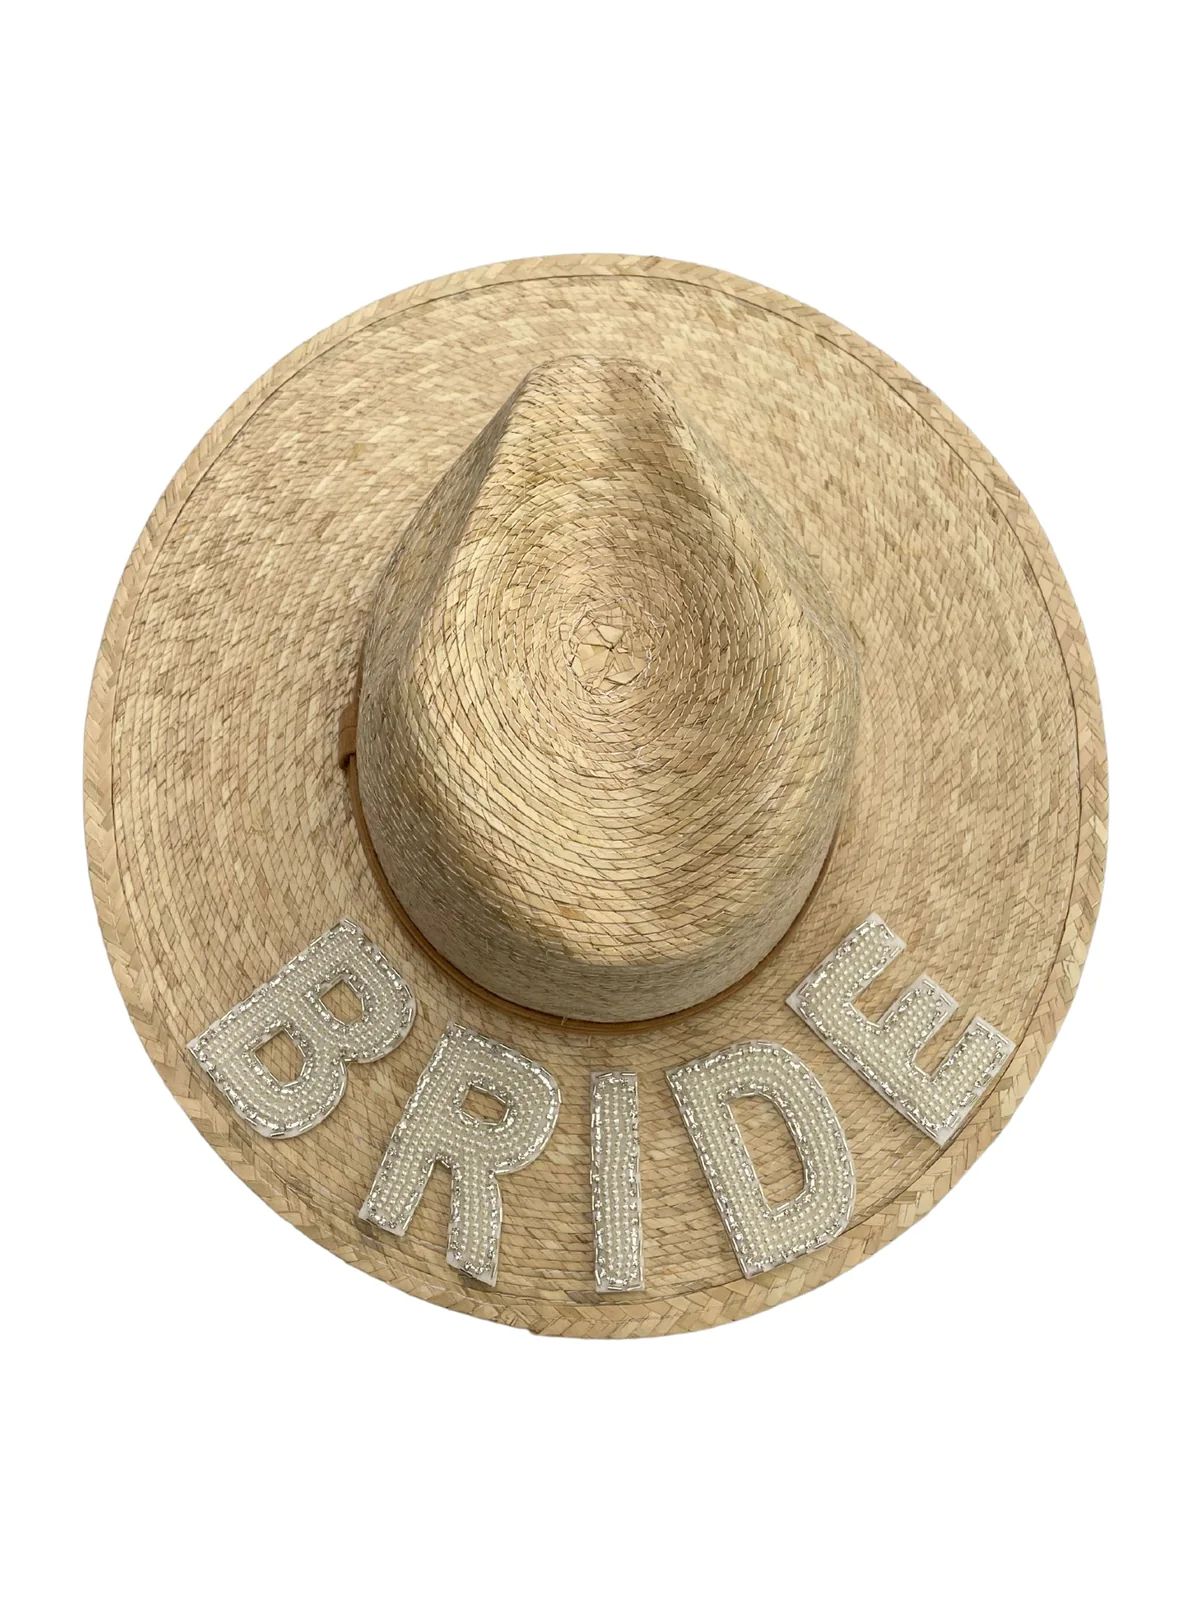 BRIDE TO BE SUN HAT | Judith March